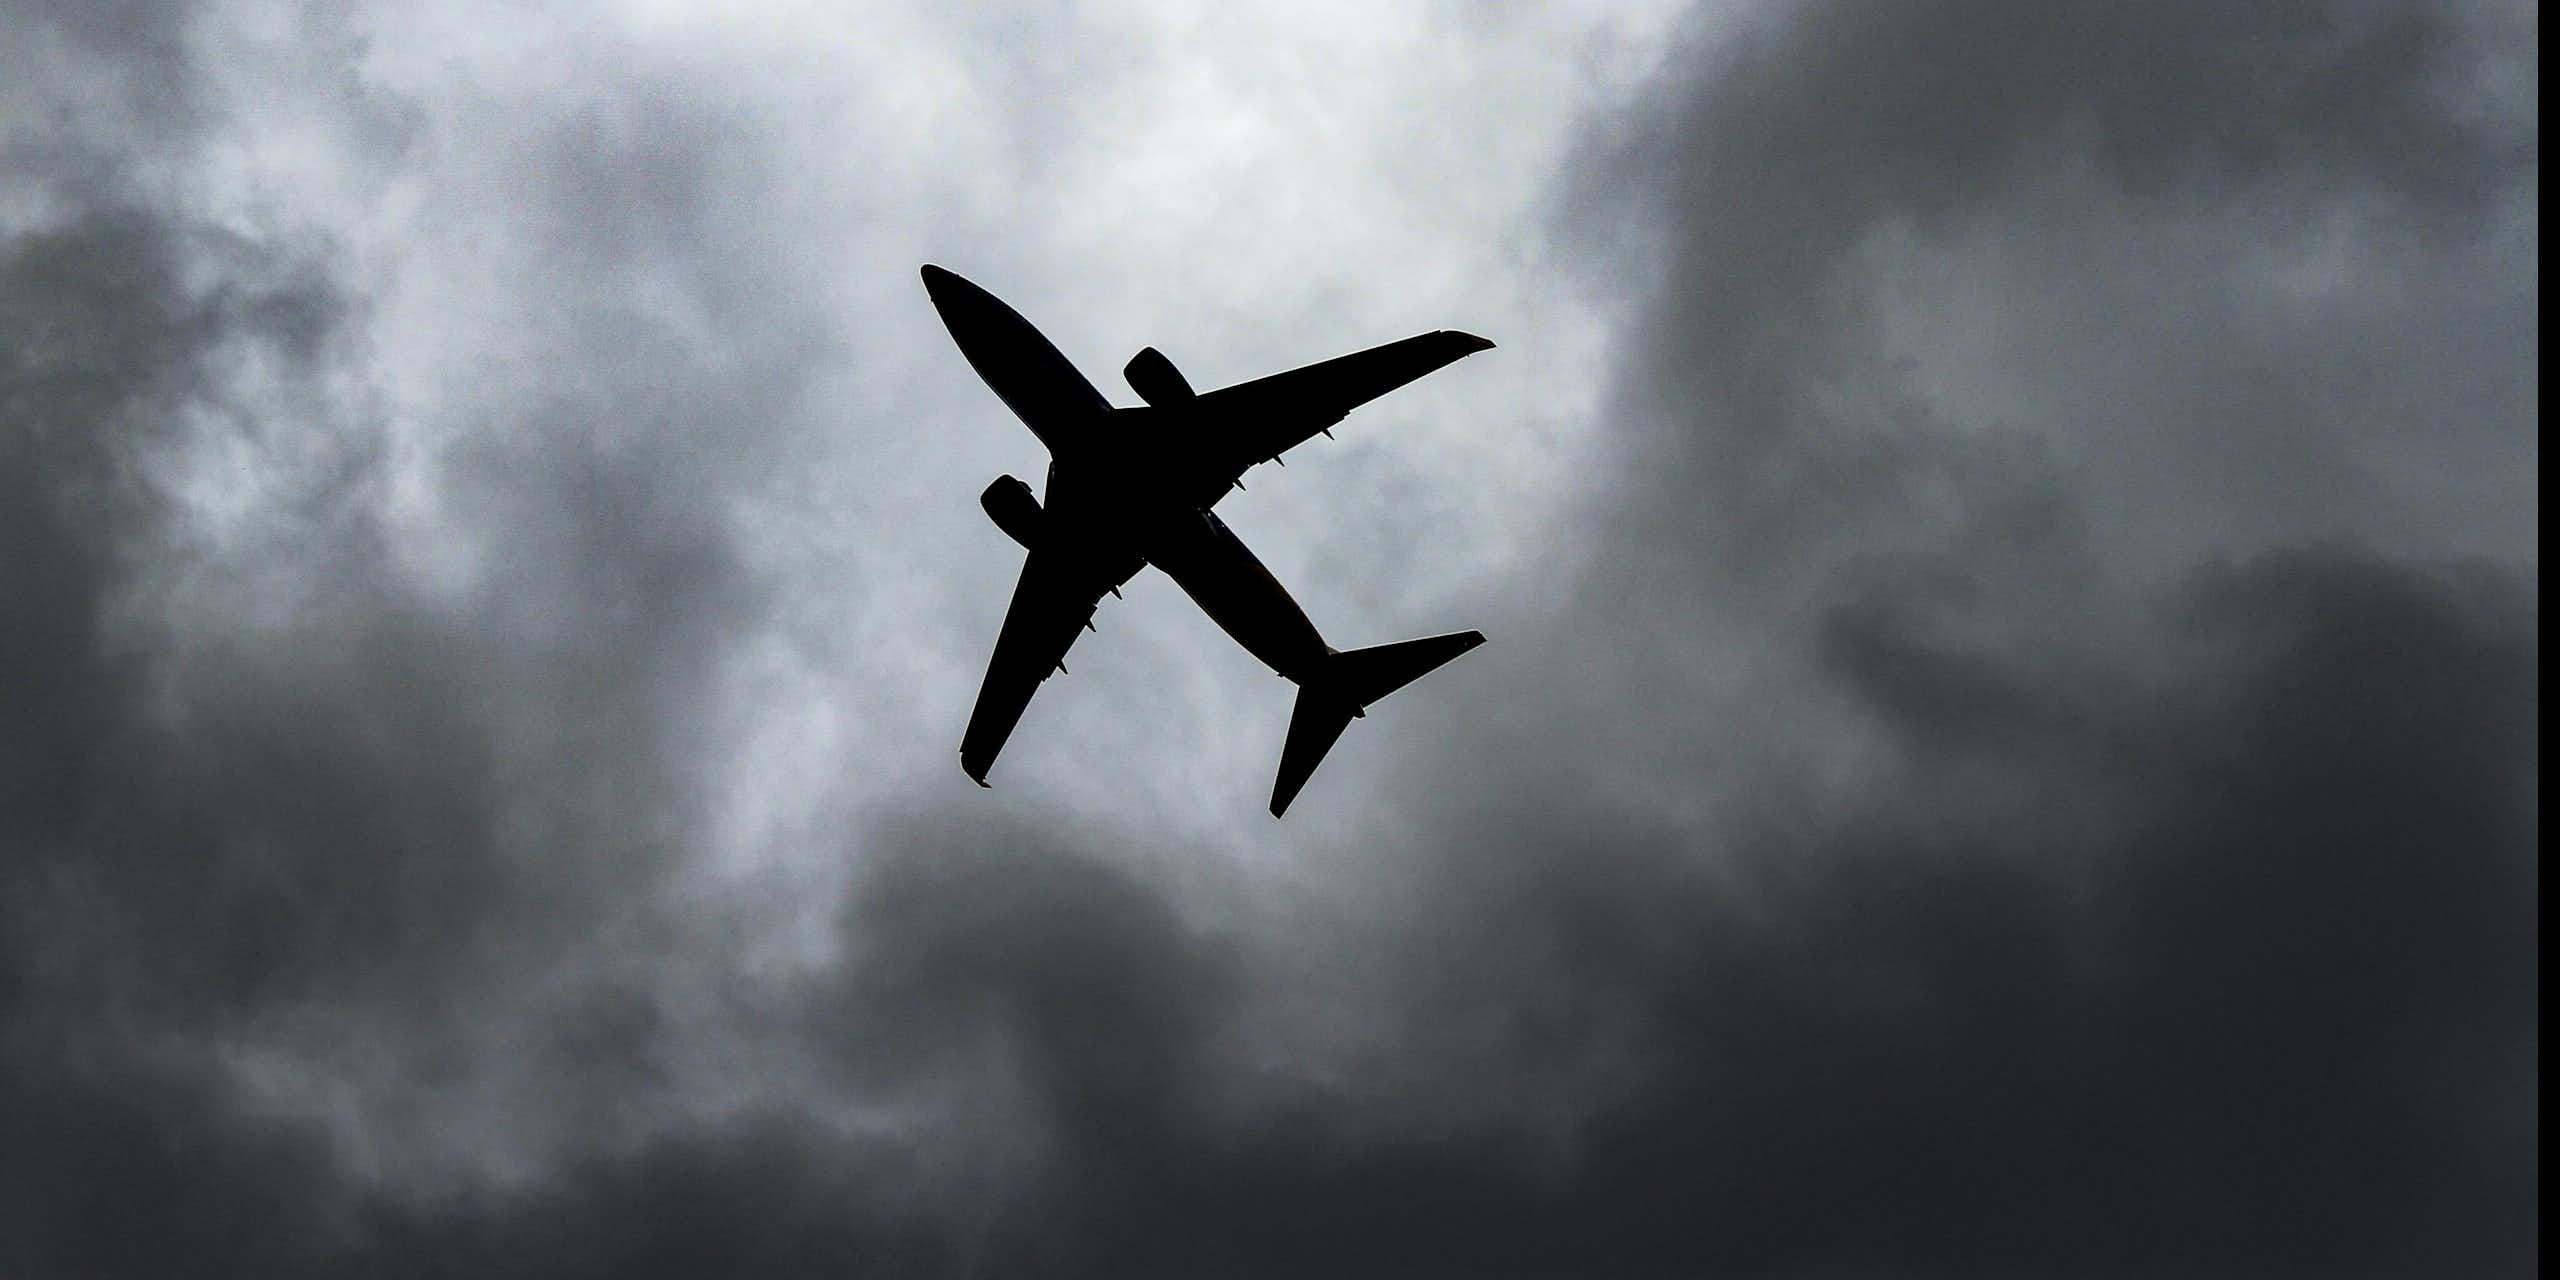 A silhouetted plane against a grey cloudy sky.